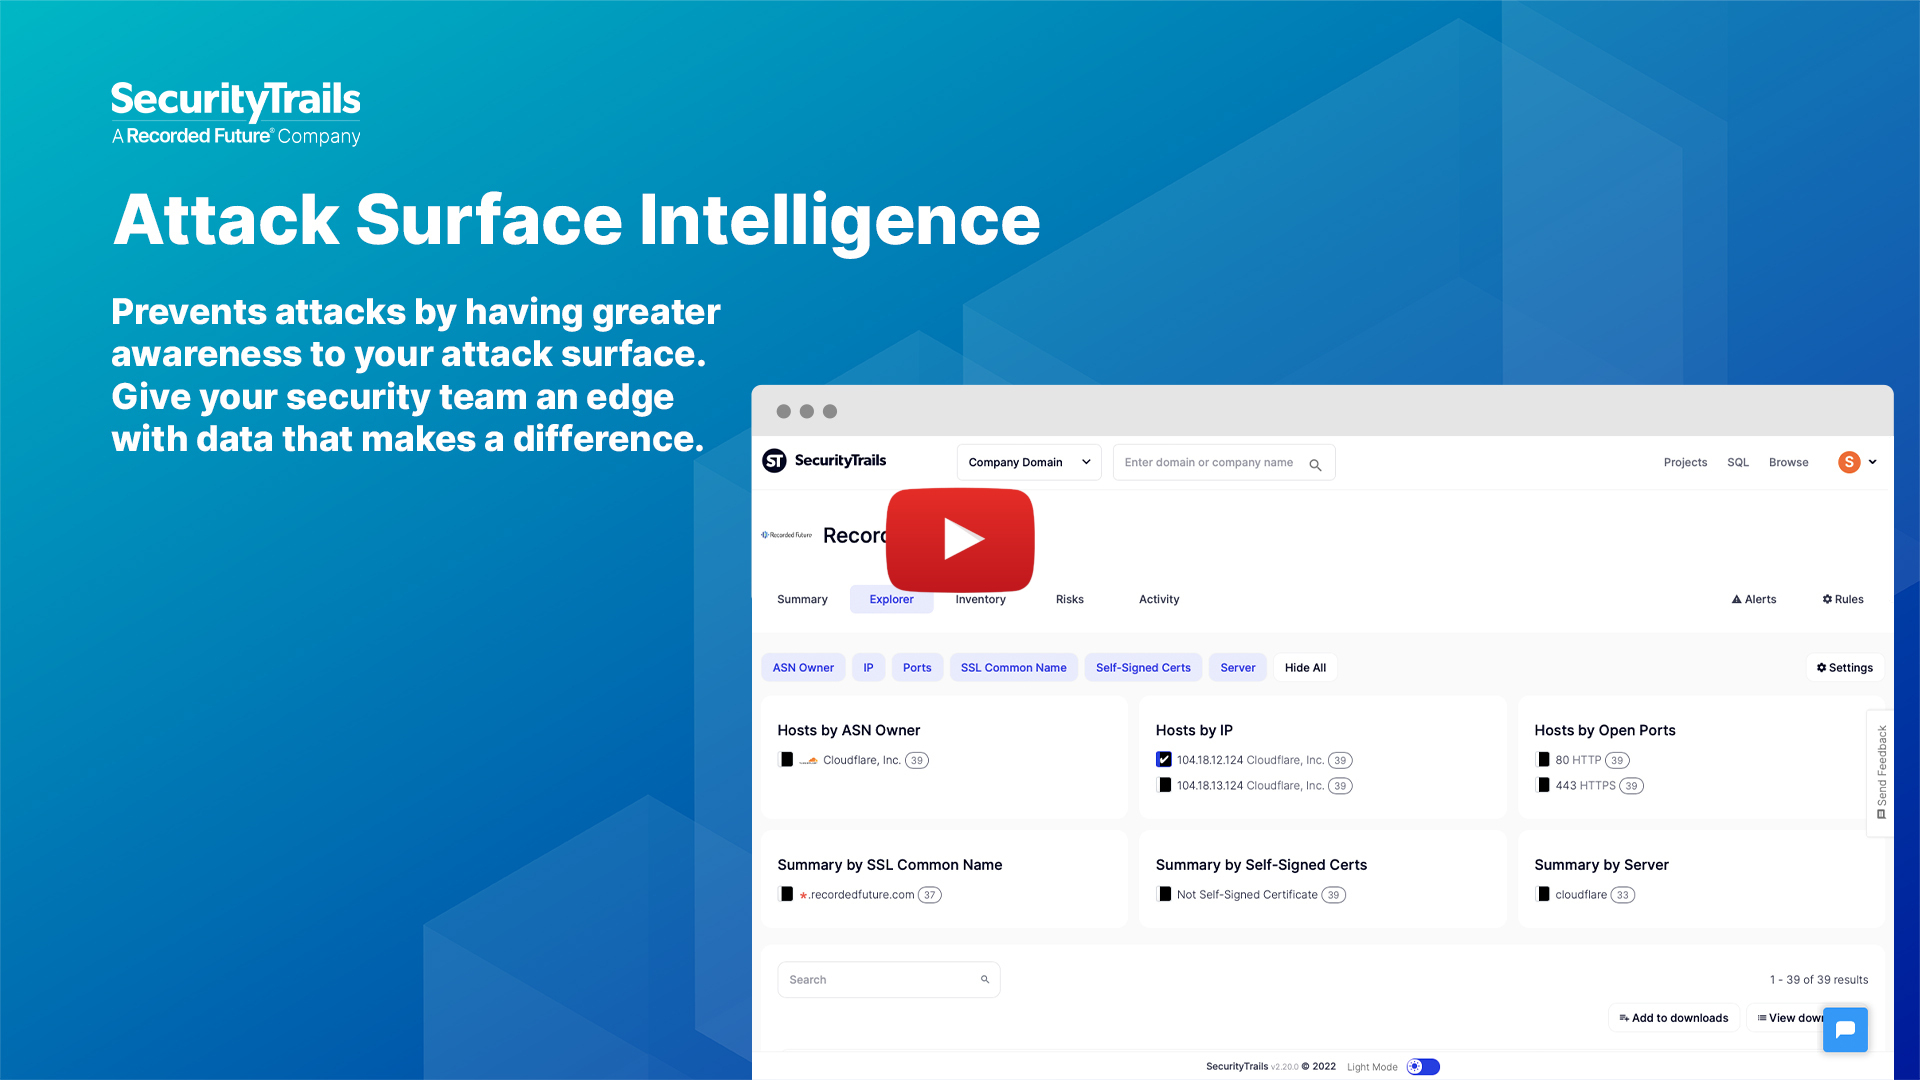 Video Attack Surface Intelligence